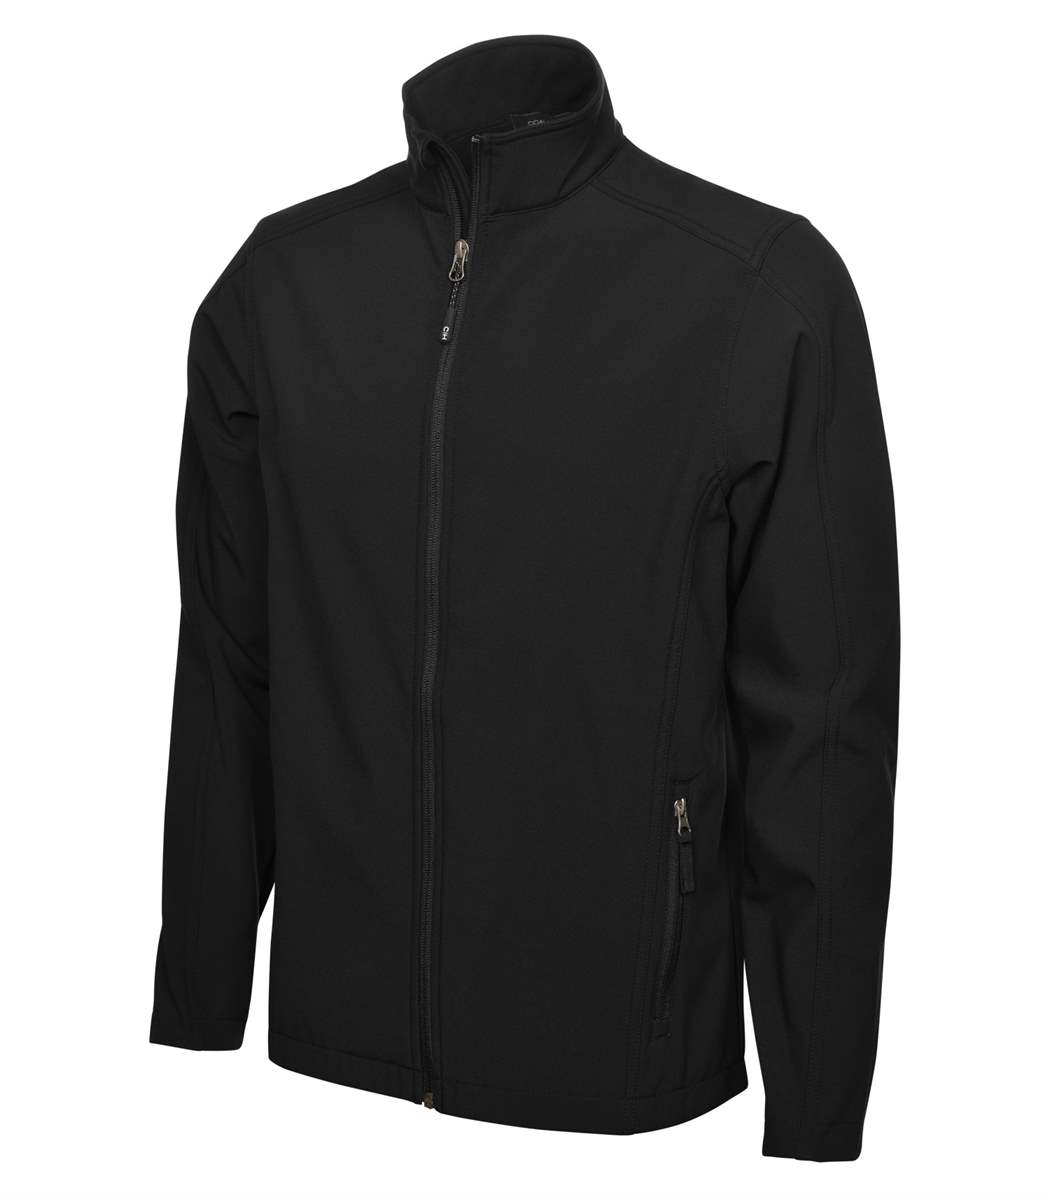 COAL HARBOUR J7603 EVERYDAY SOFT SHELL JACKET - Great West Graphics